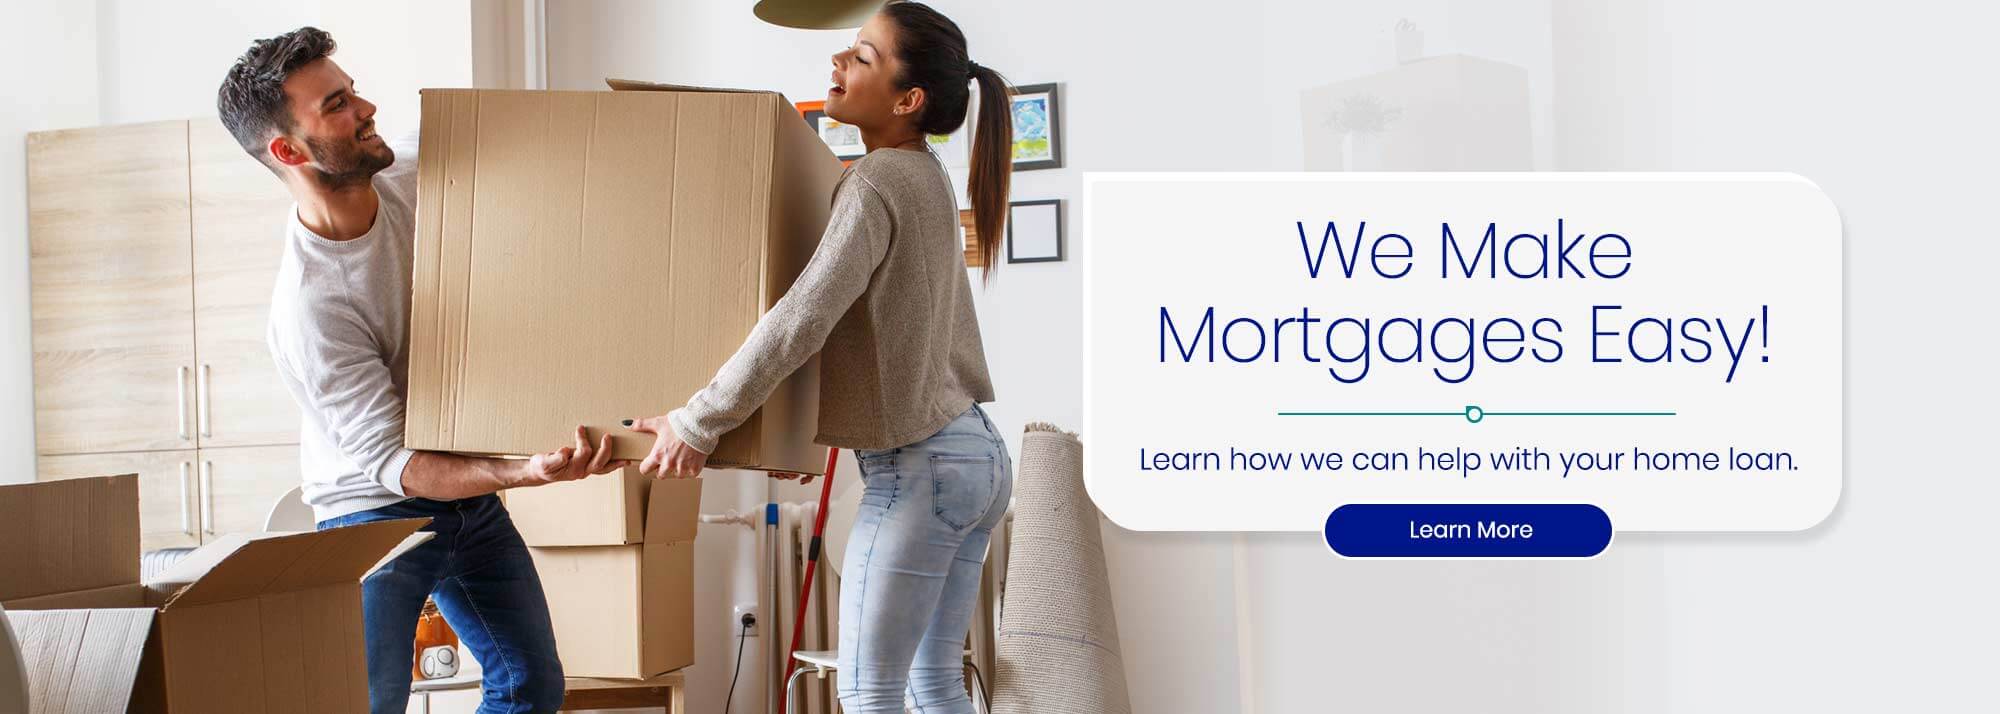 We make mortgages easy! Learn how we can help with your home loan. learn more